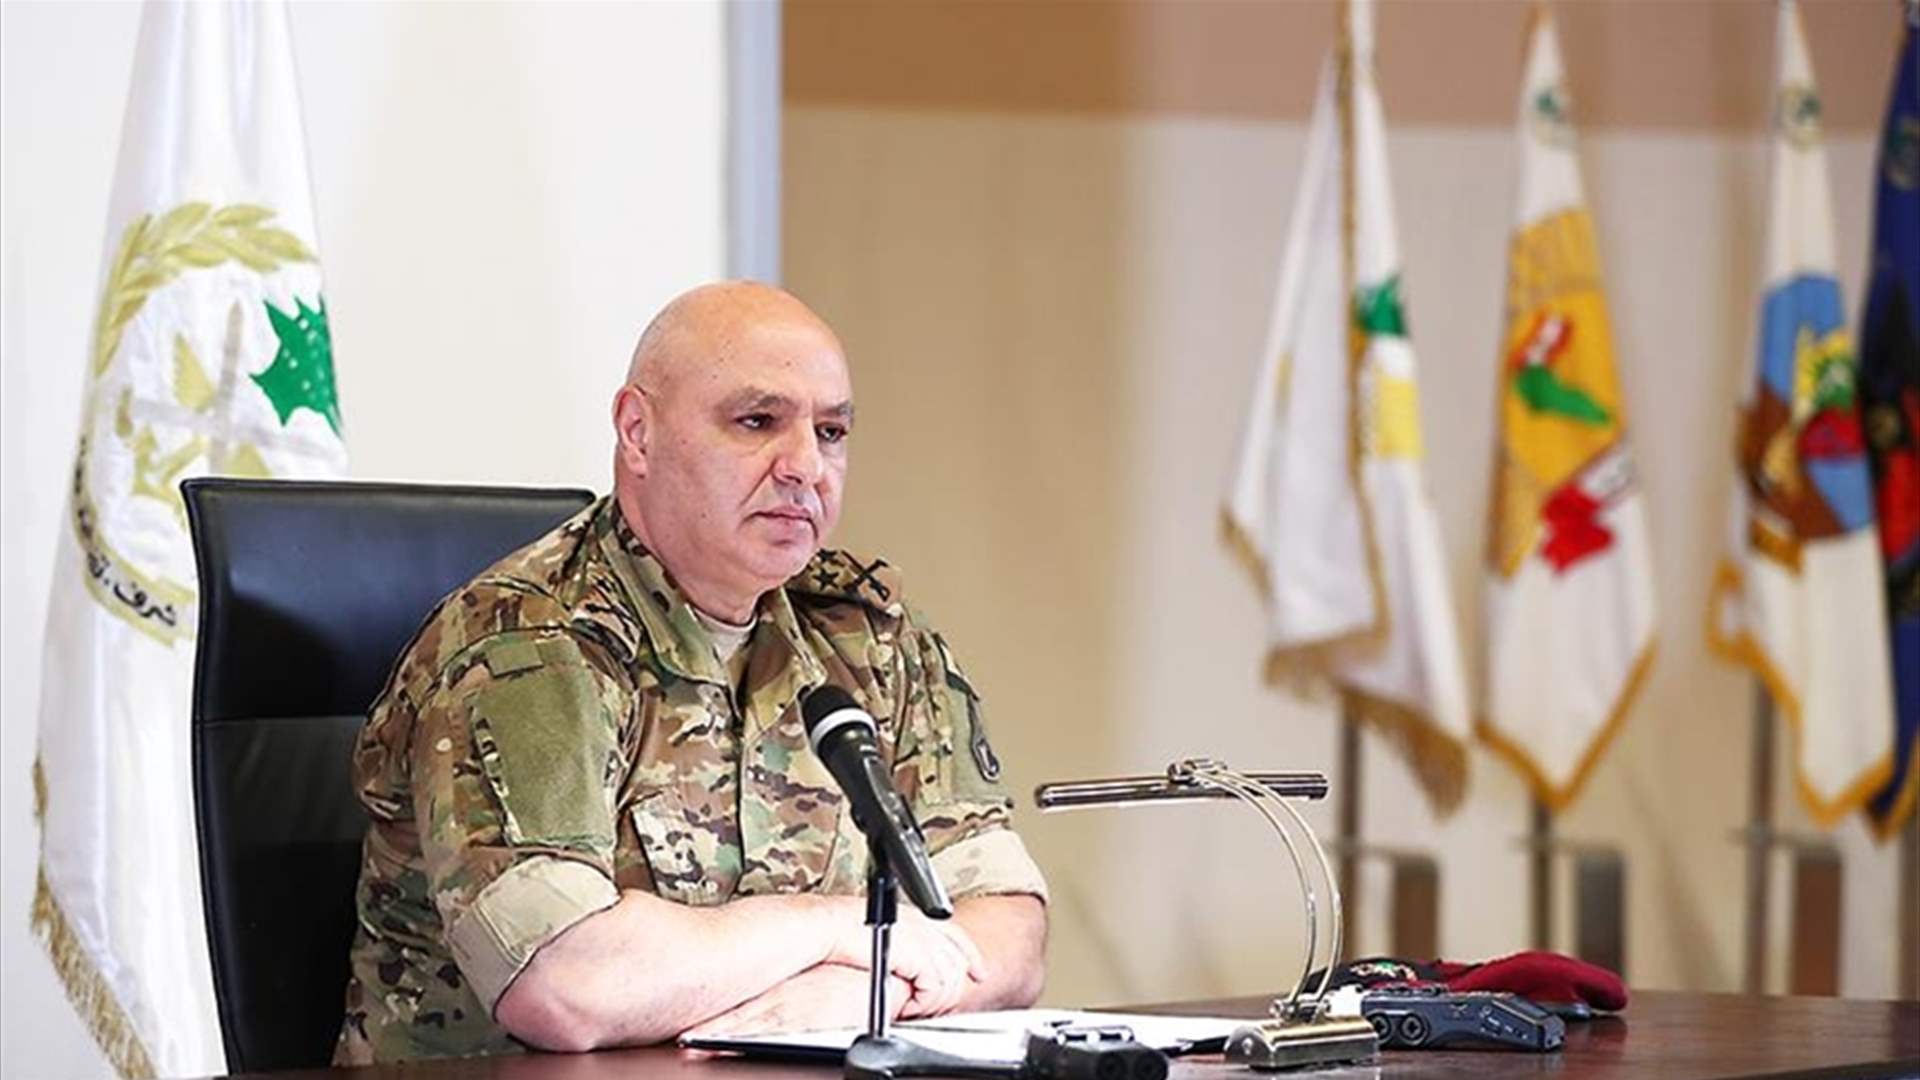 Lebanese army has faced wars and fragmentation but returned united: LAF Commander